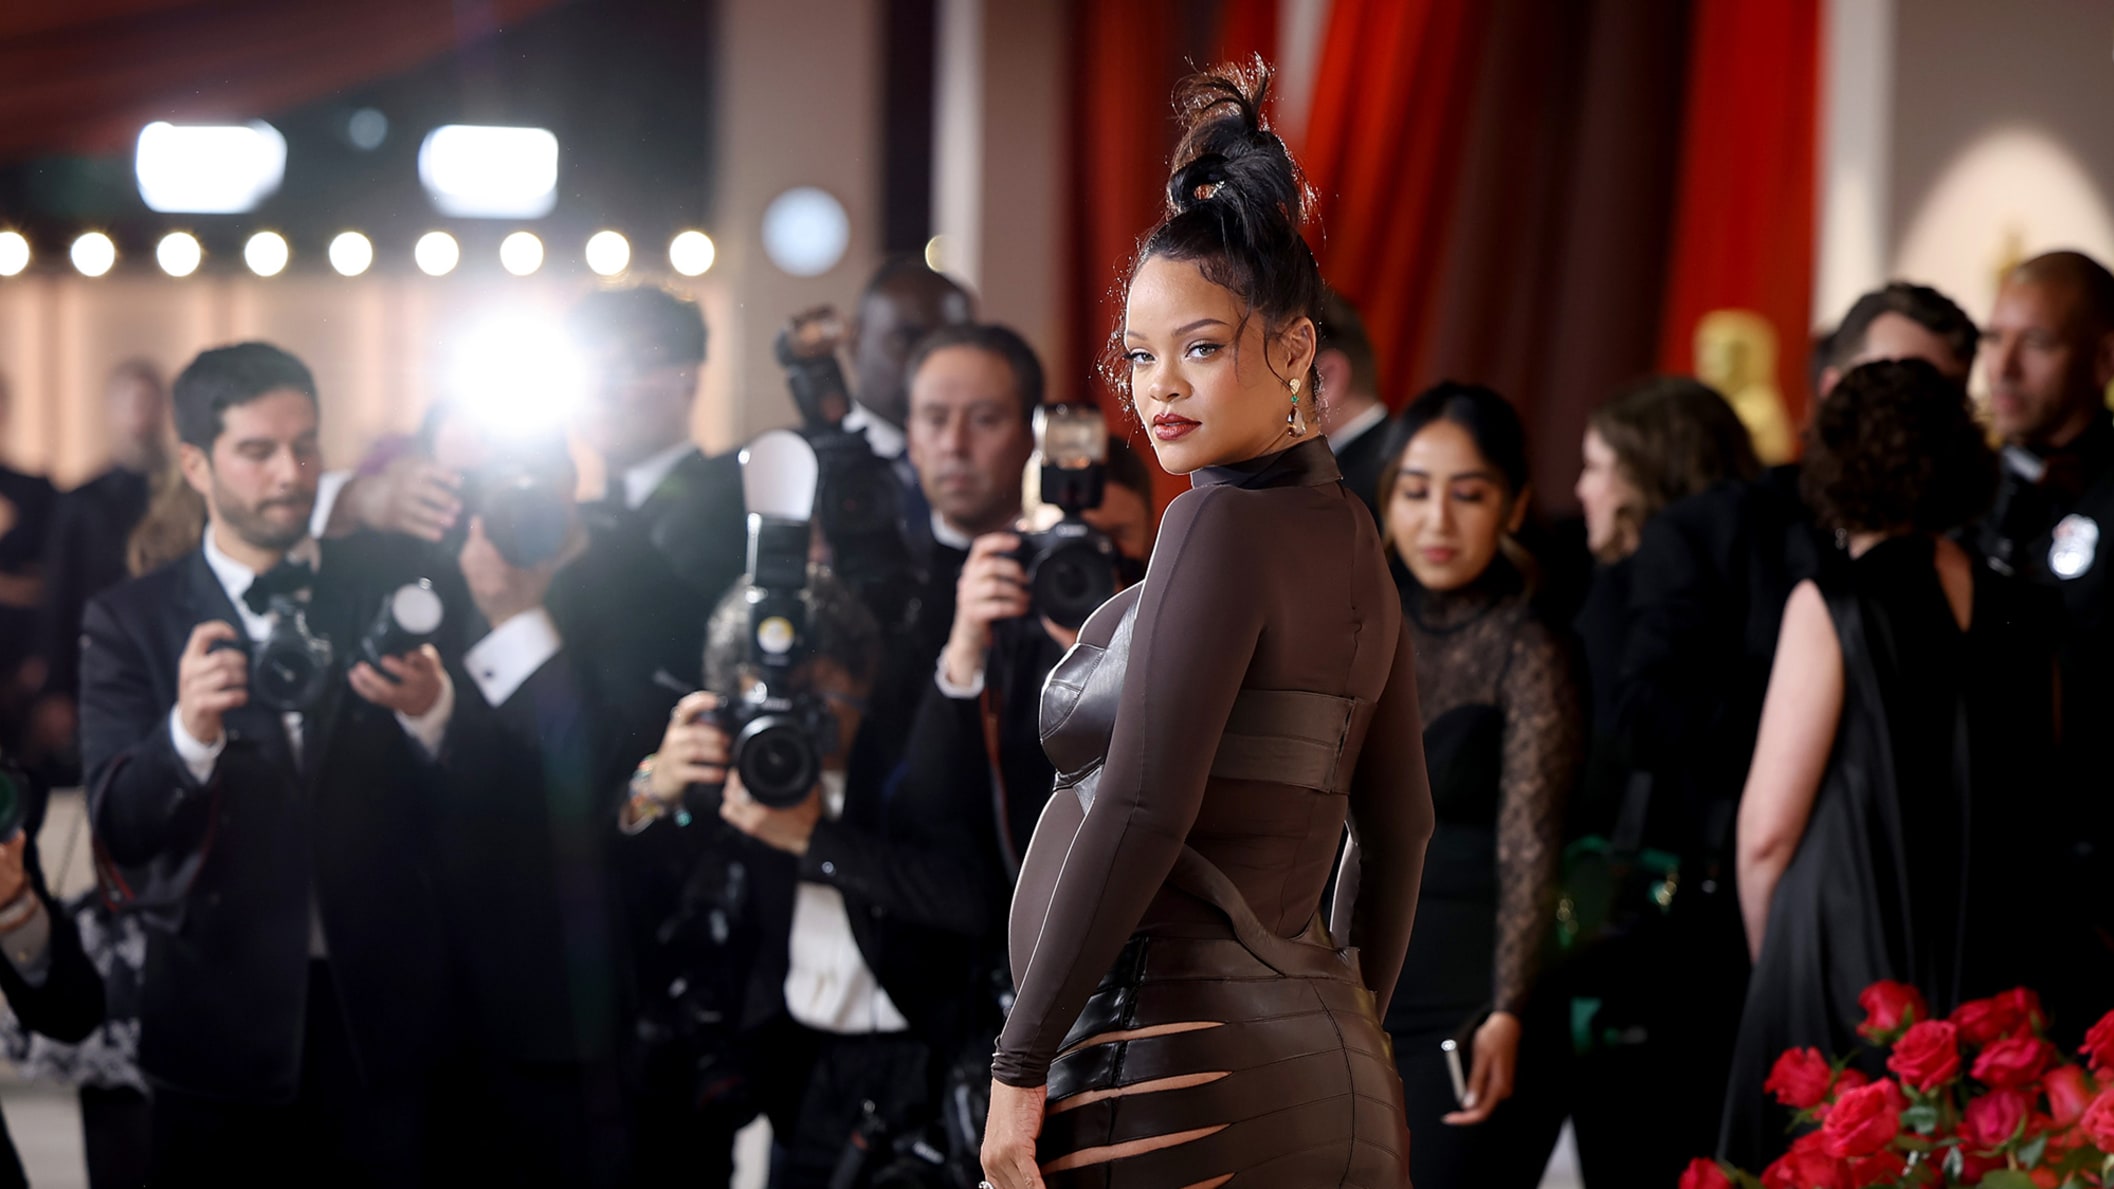 HOLLYWOOD, CALIFORNIA - MARCH 12: Rihanna attends the 95th Annual Academy Awards on March 12, 2023 in Hollywood, California. (Photo by Mike Coppola/Getty Images)